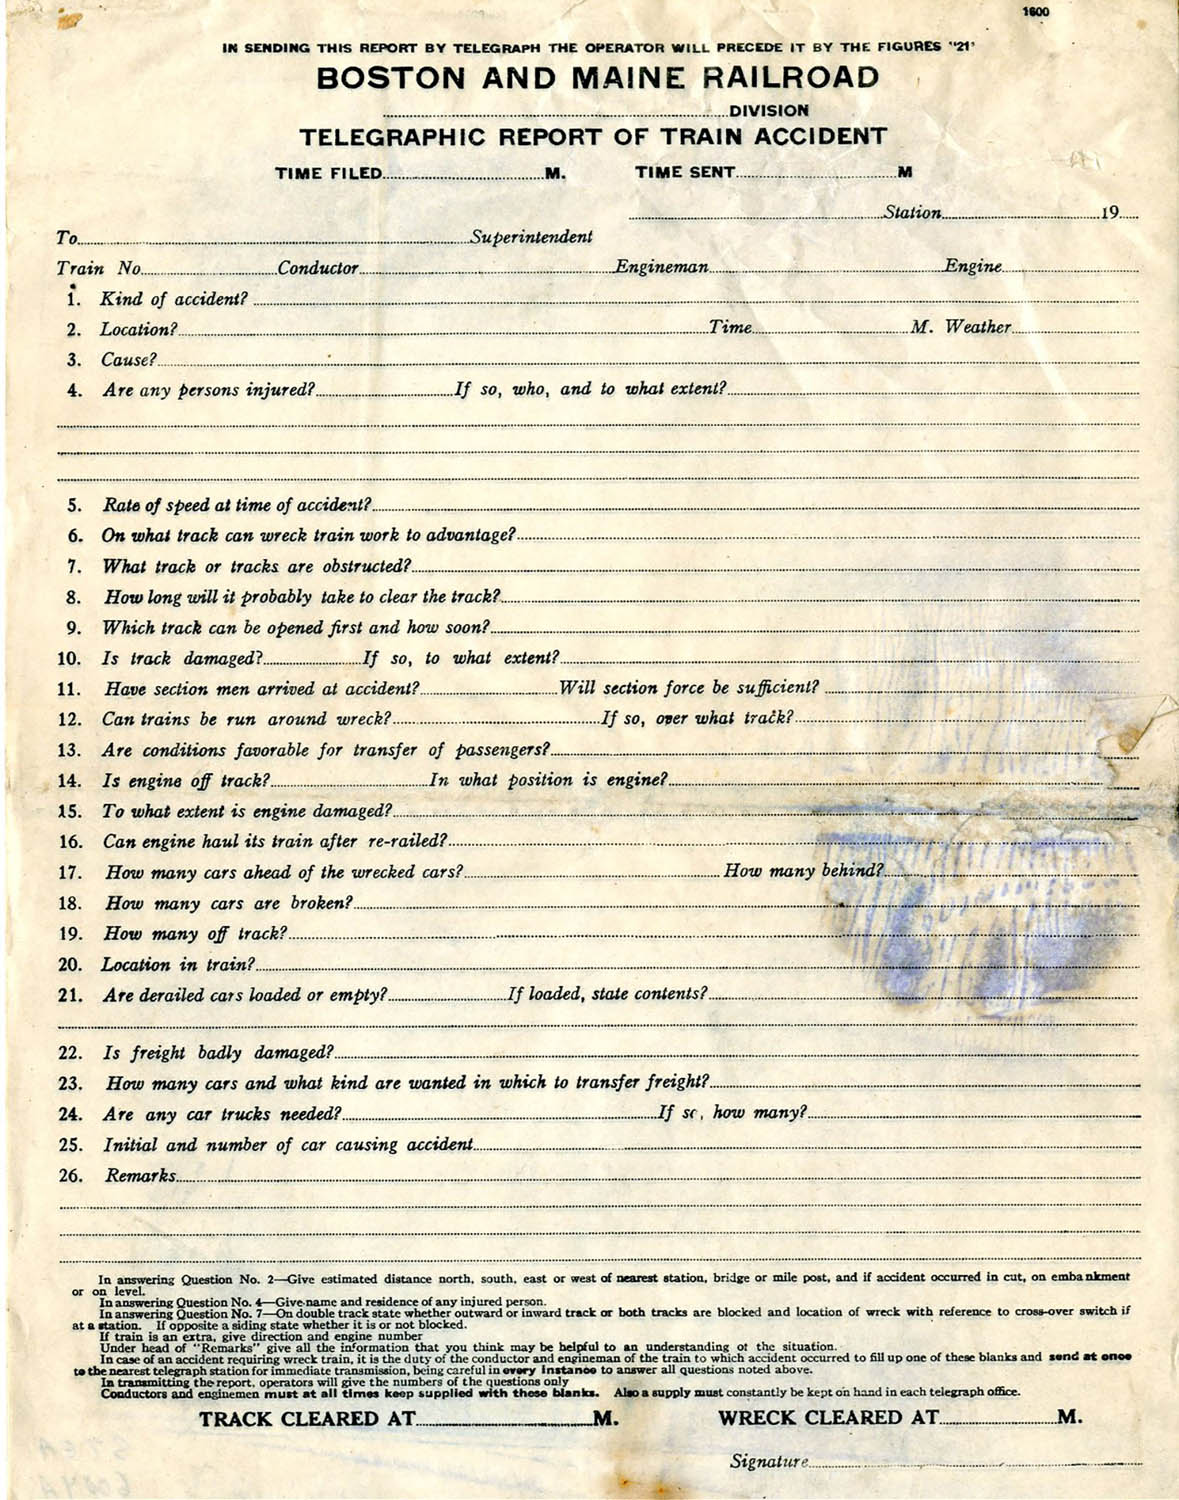 Telegraphic Report of Train Accident Form